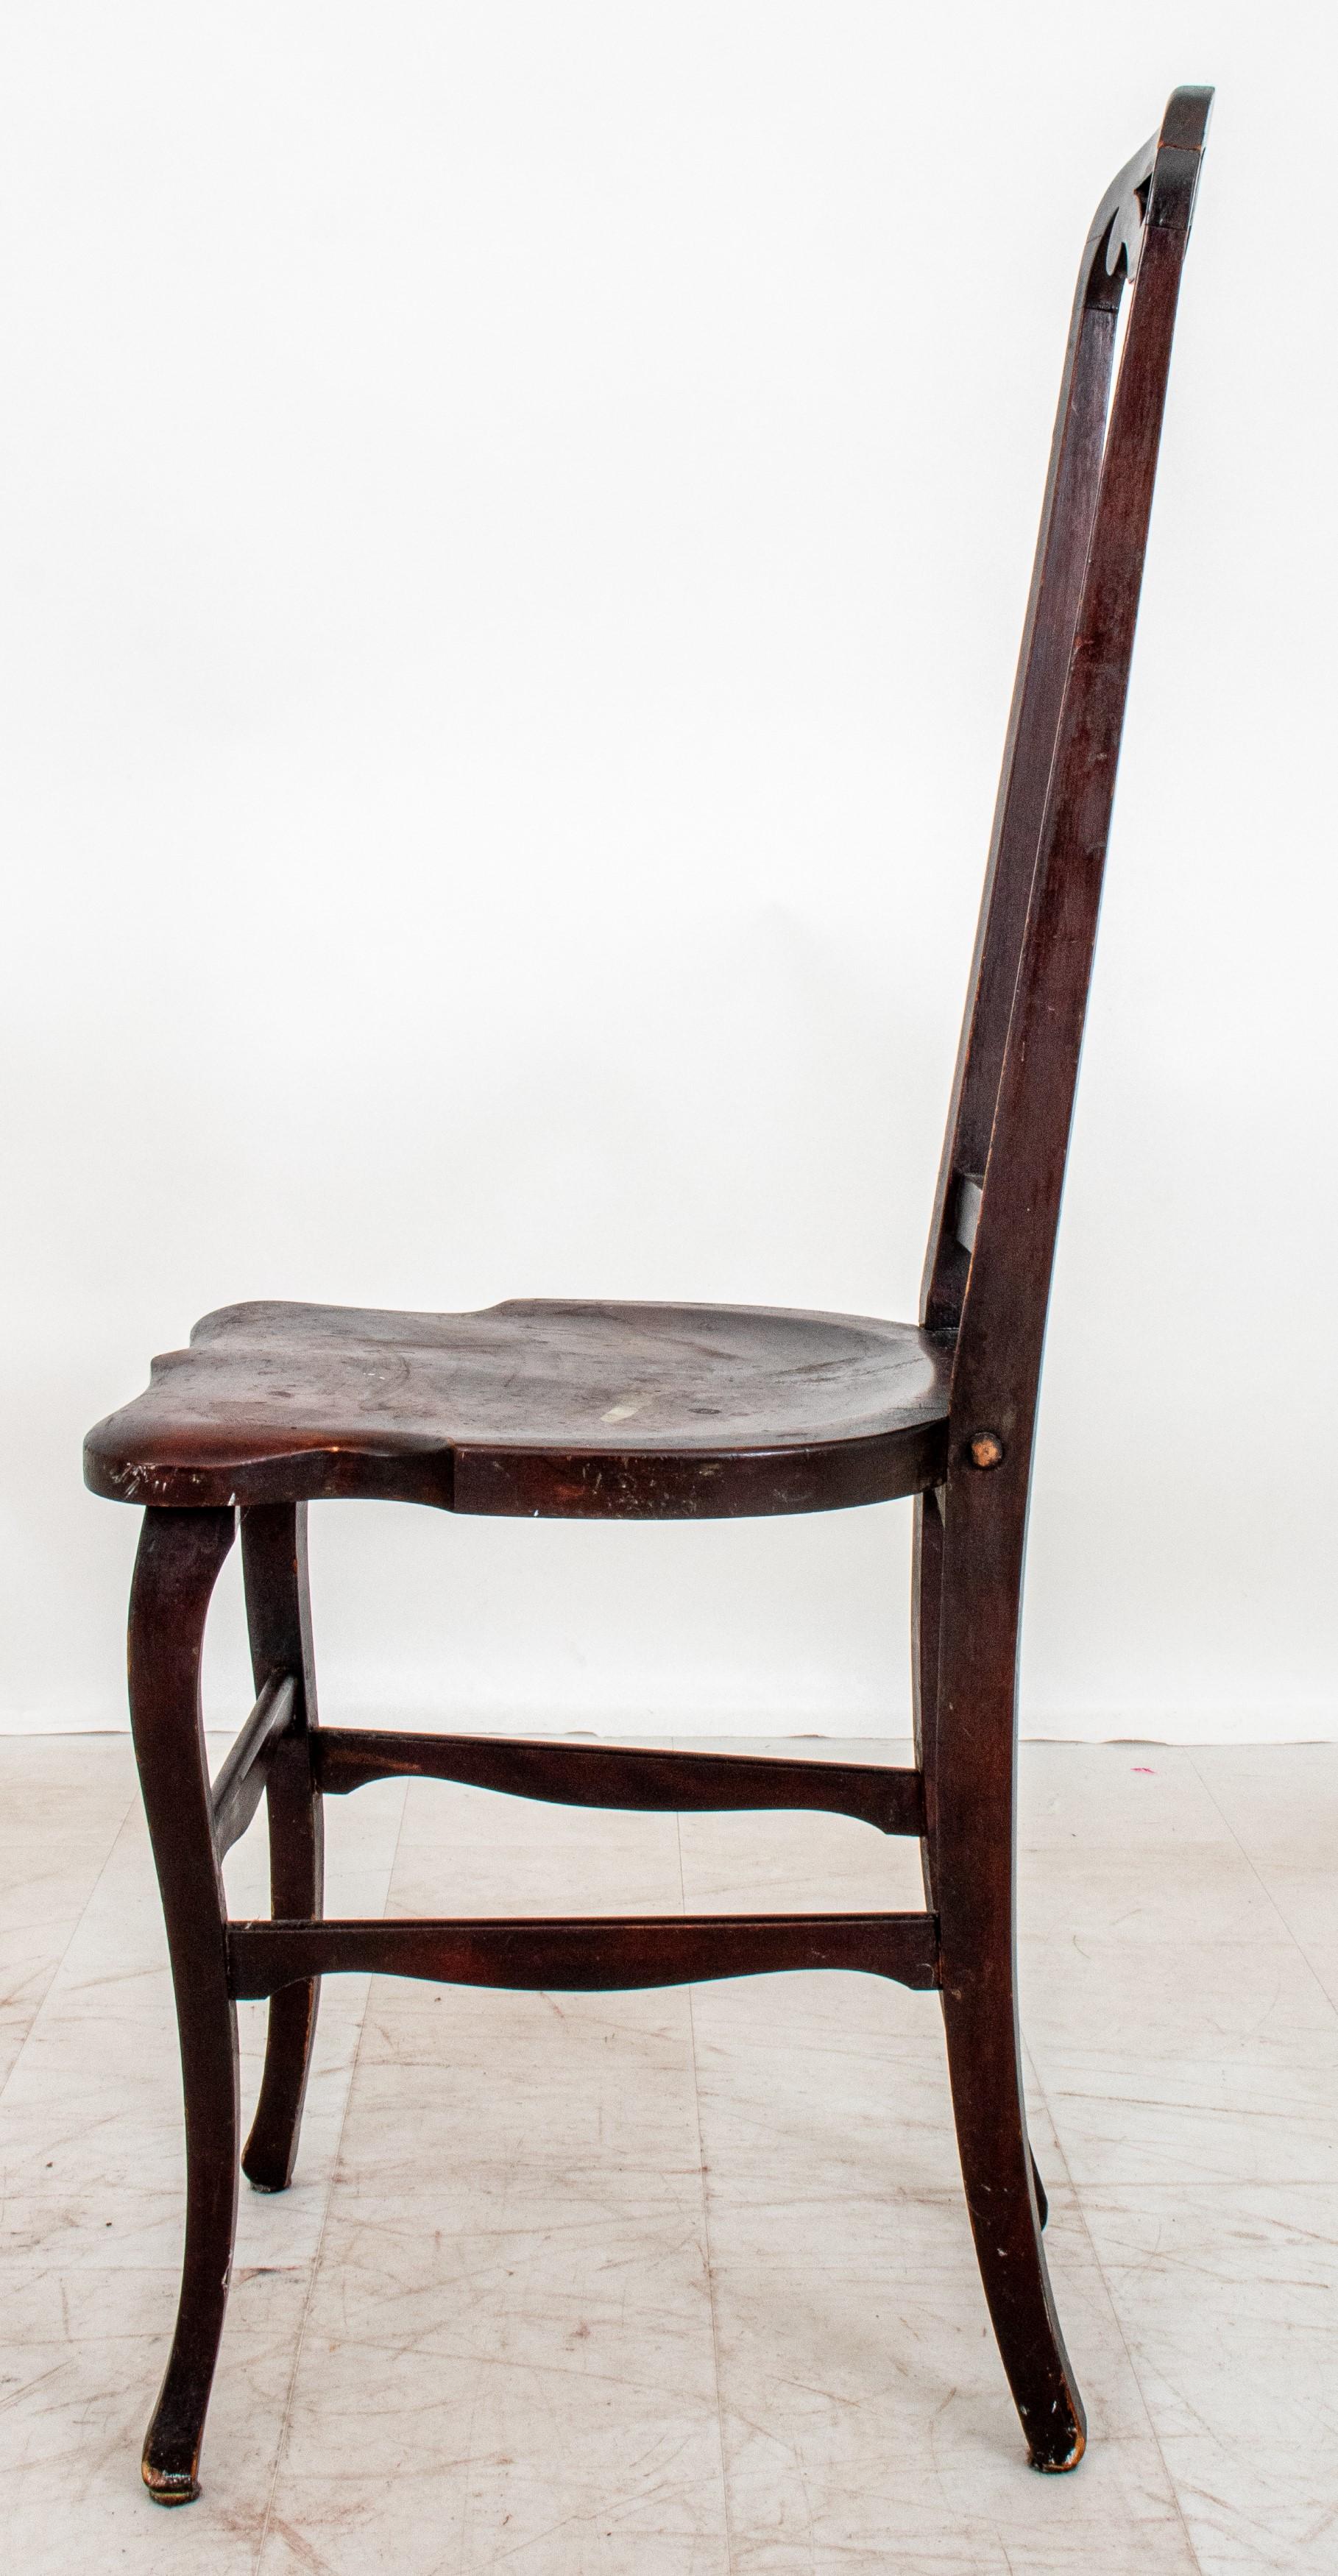 Wood American Colonial Revival Hall Chair, ca. 1900 For Sale